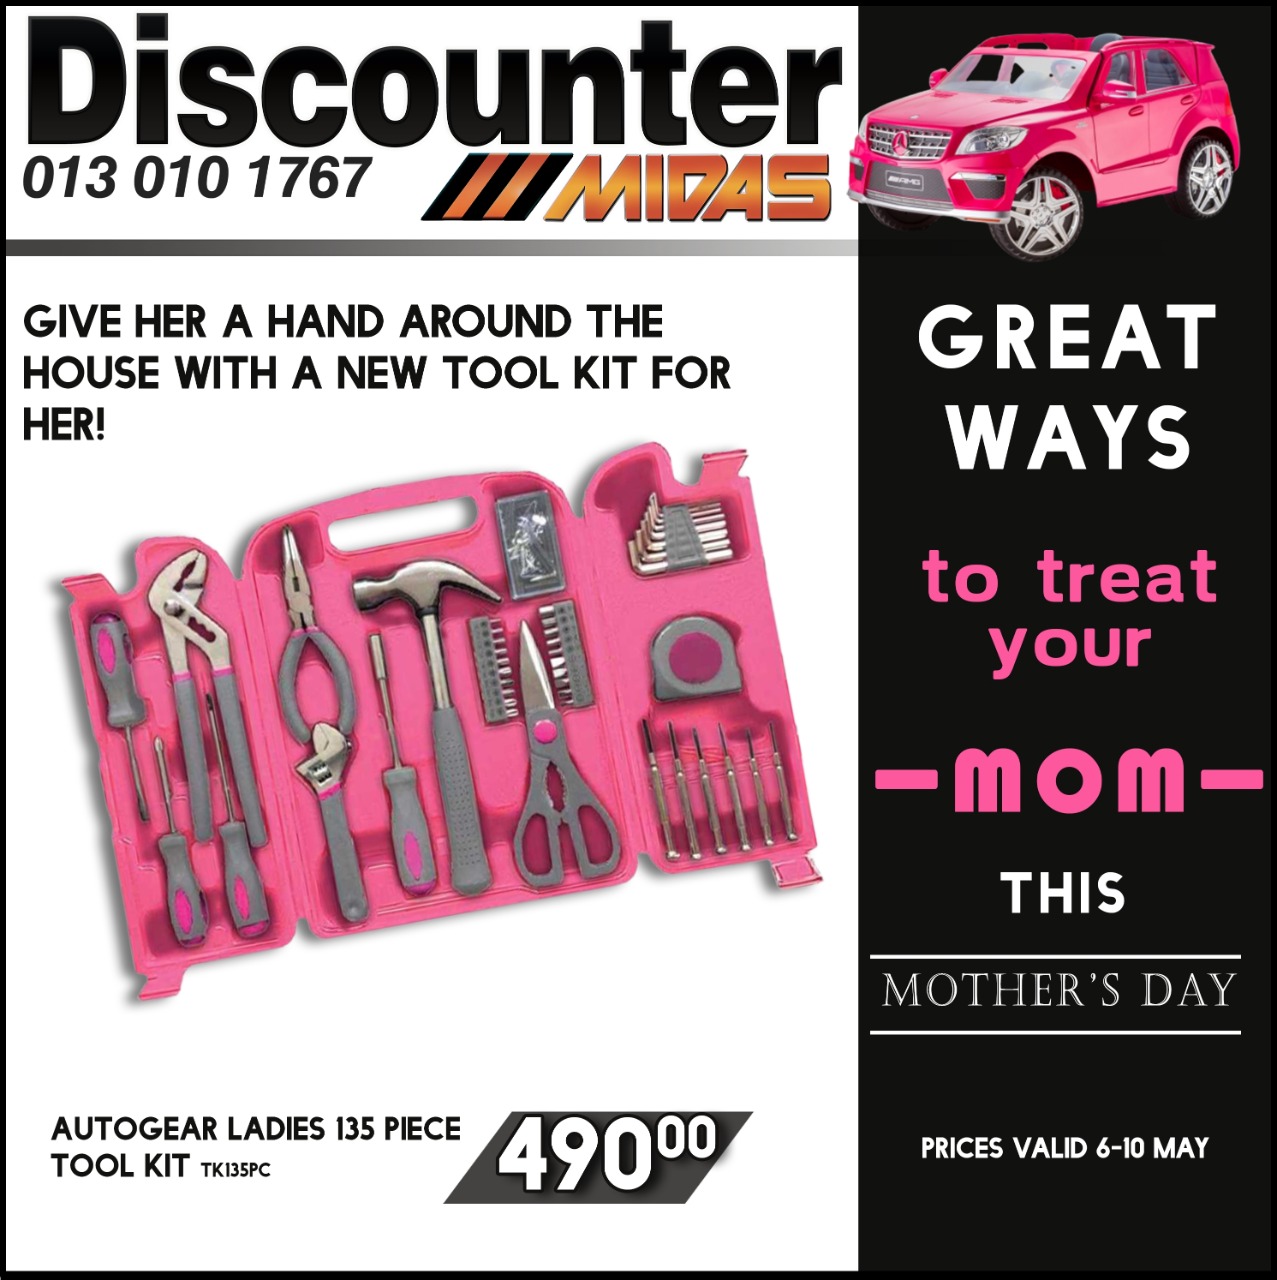 Great ways to Treat your Mom this Mother's Day at Discounter Midas!